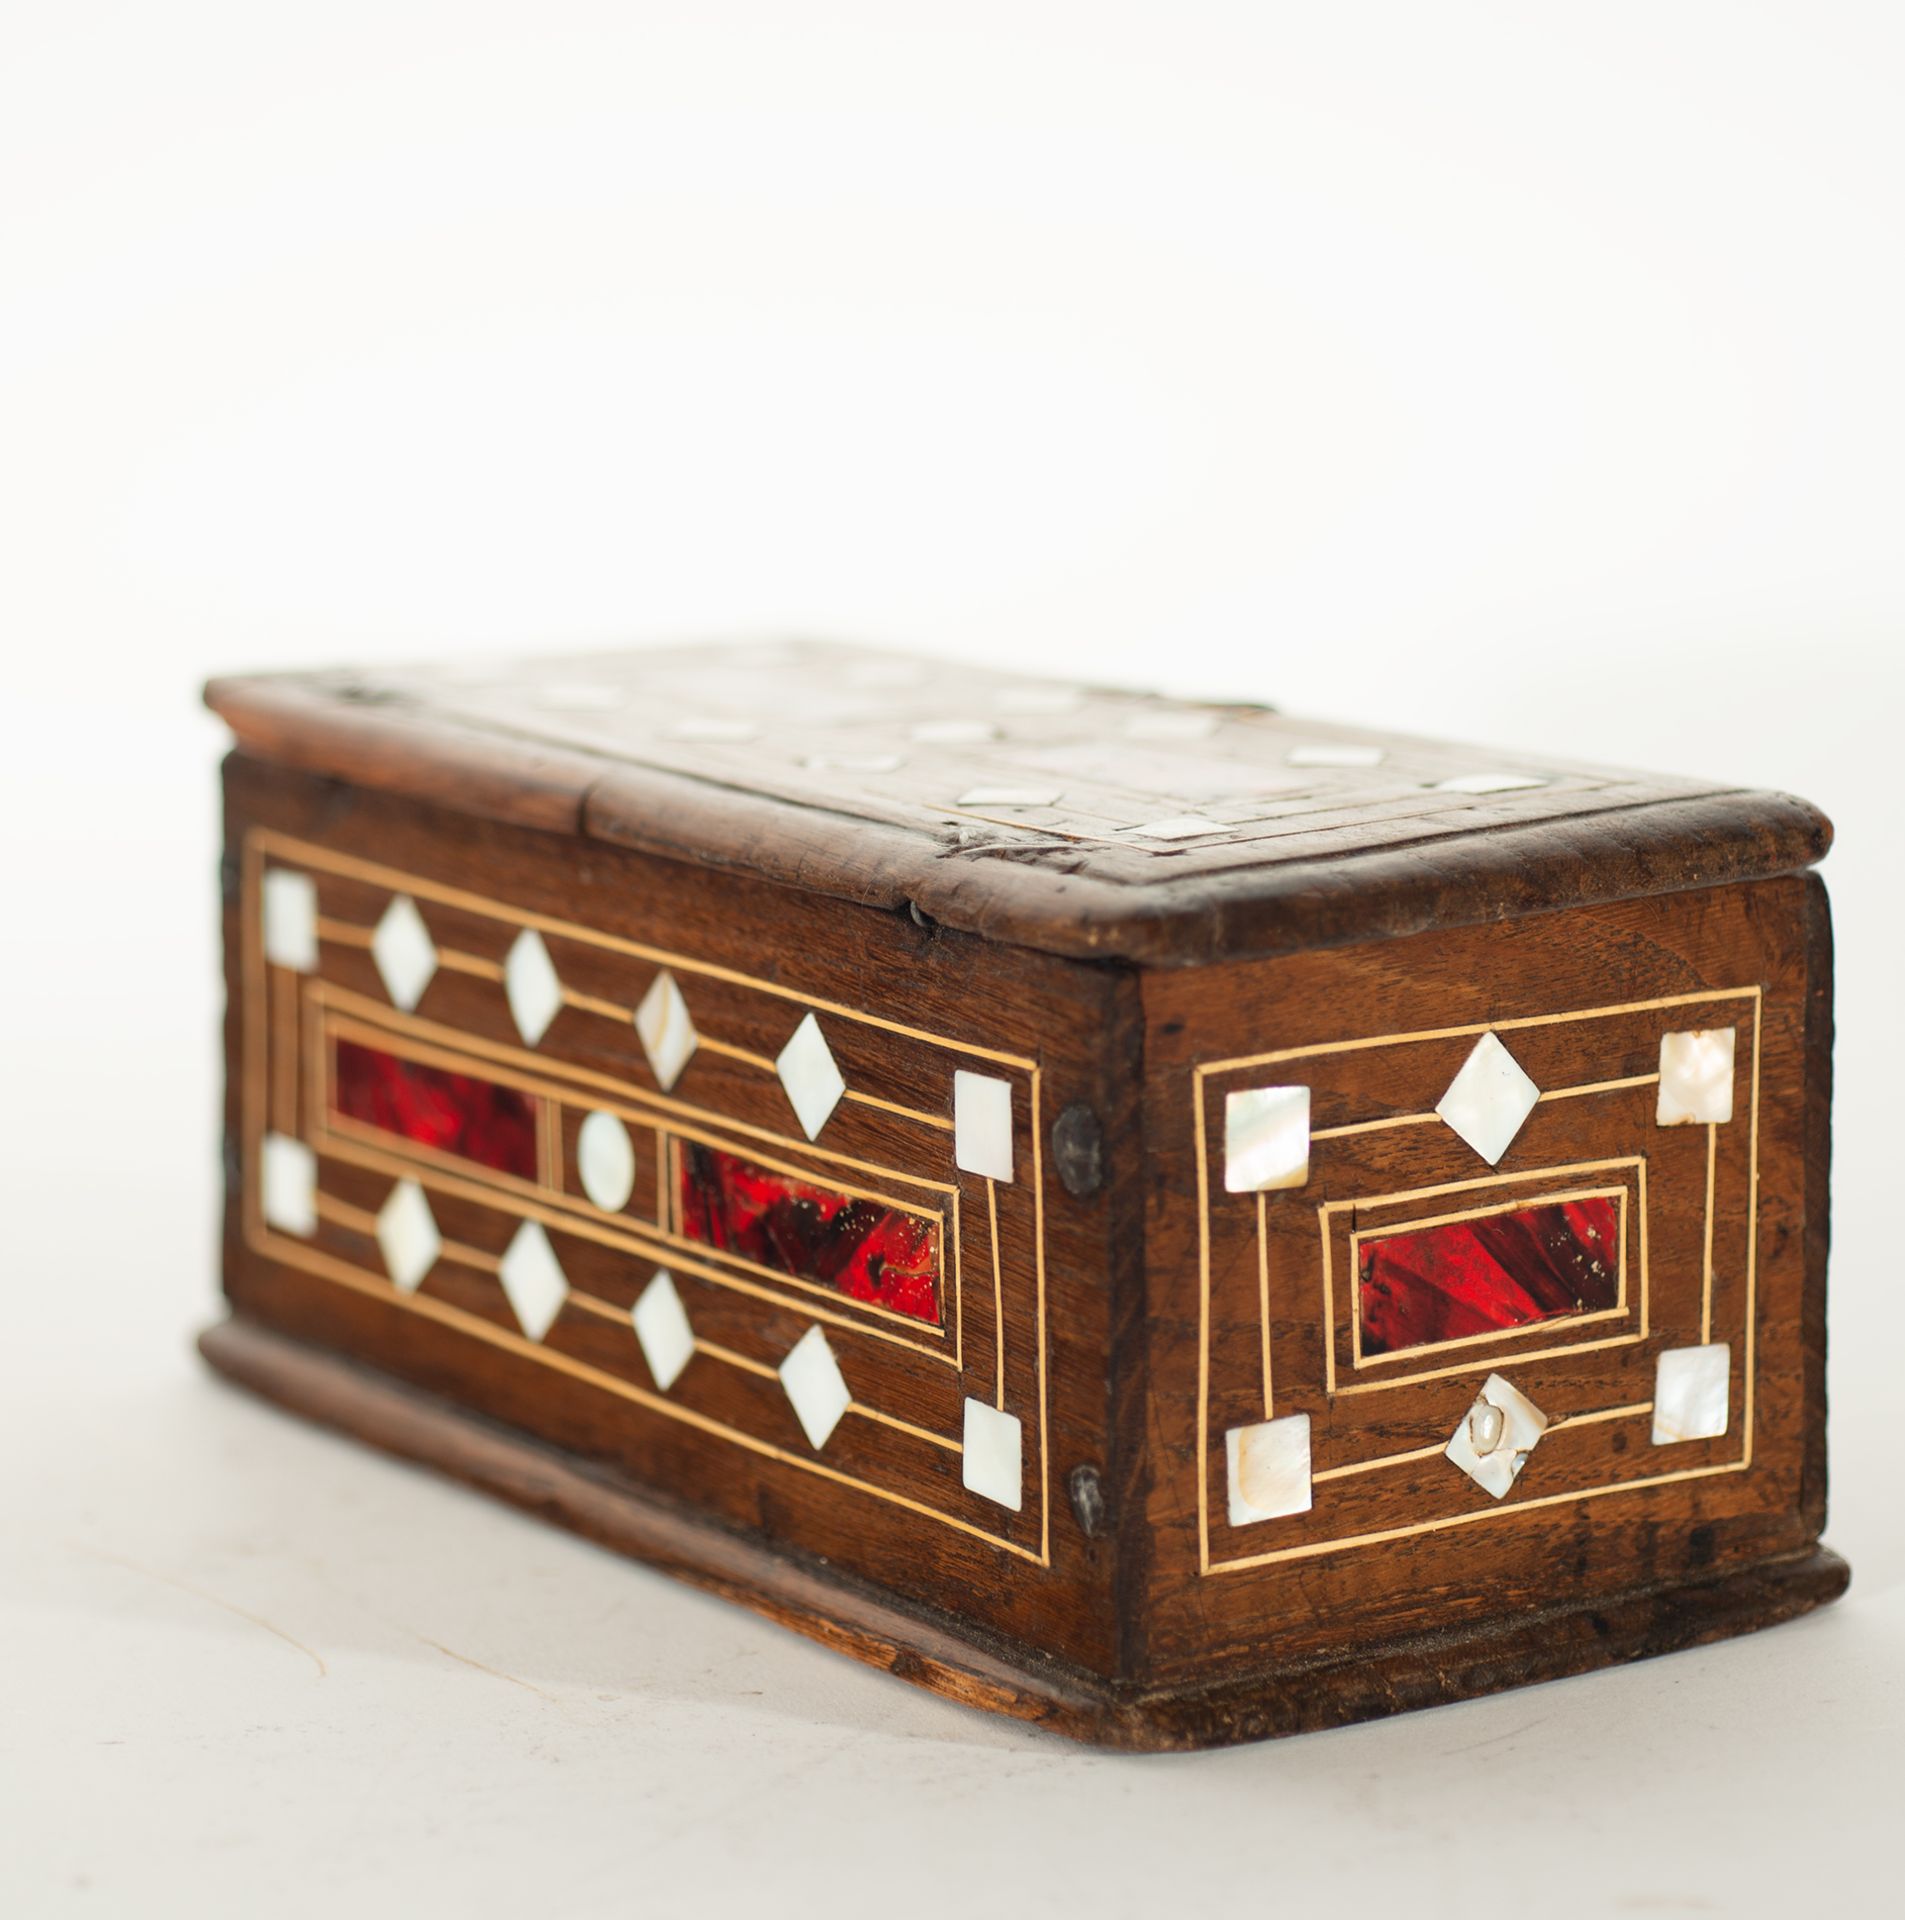 Cash box inlaid with mother-of-pearl, tortoiseshell and marquetry, Spanish school of the 18th-19th c - Image 2 of 4